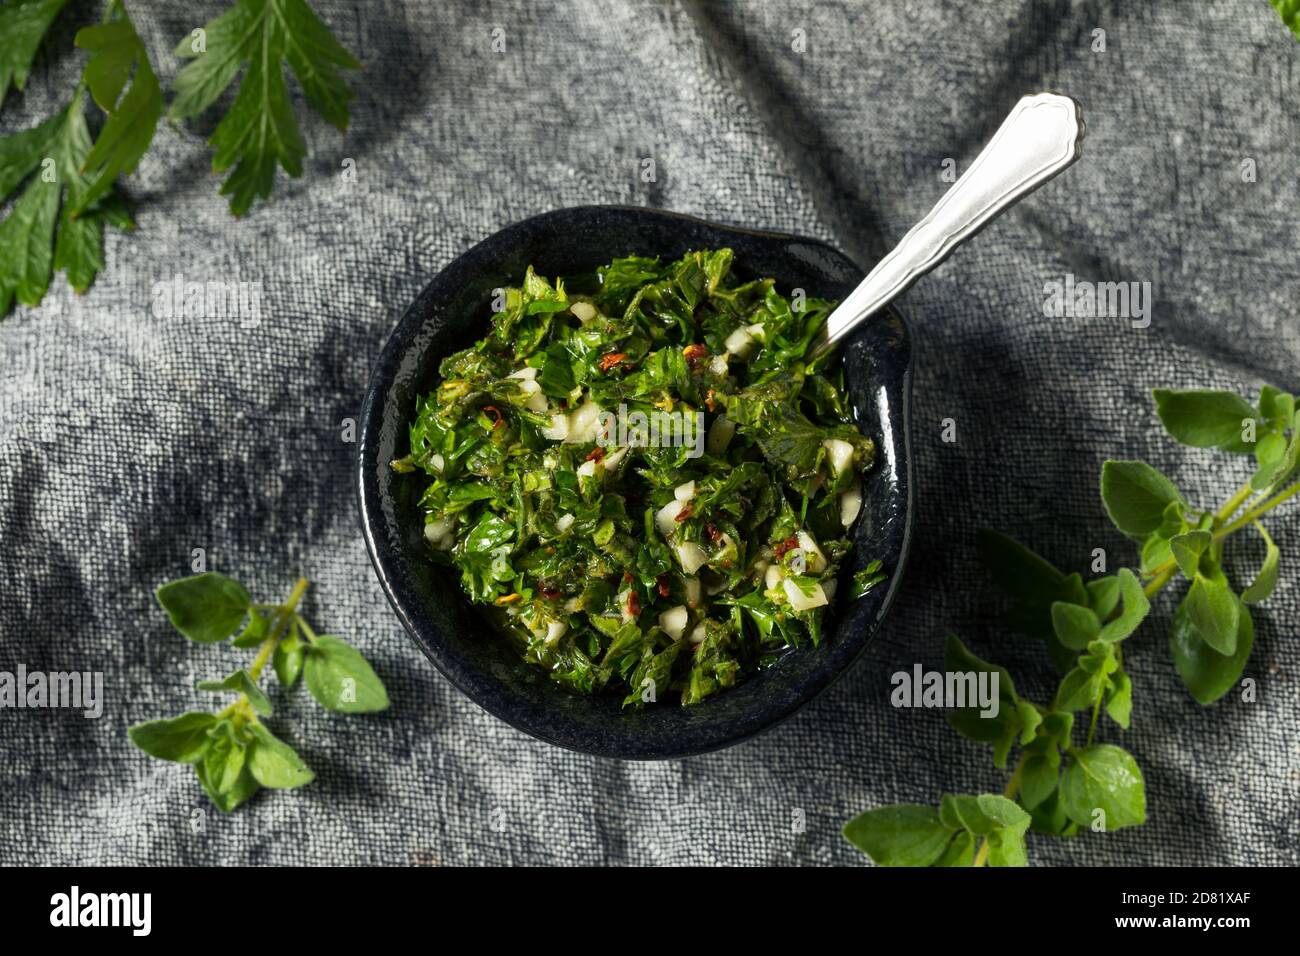 Homemade Spicy Chimichurri Sauce with Parsley and Oregano Stock Photo